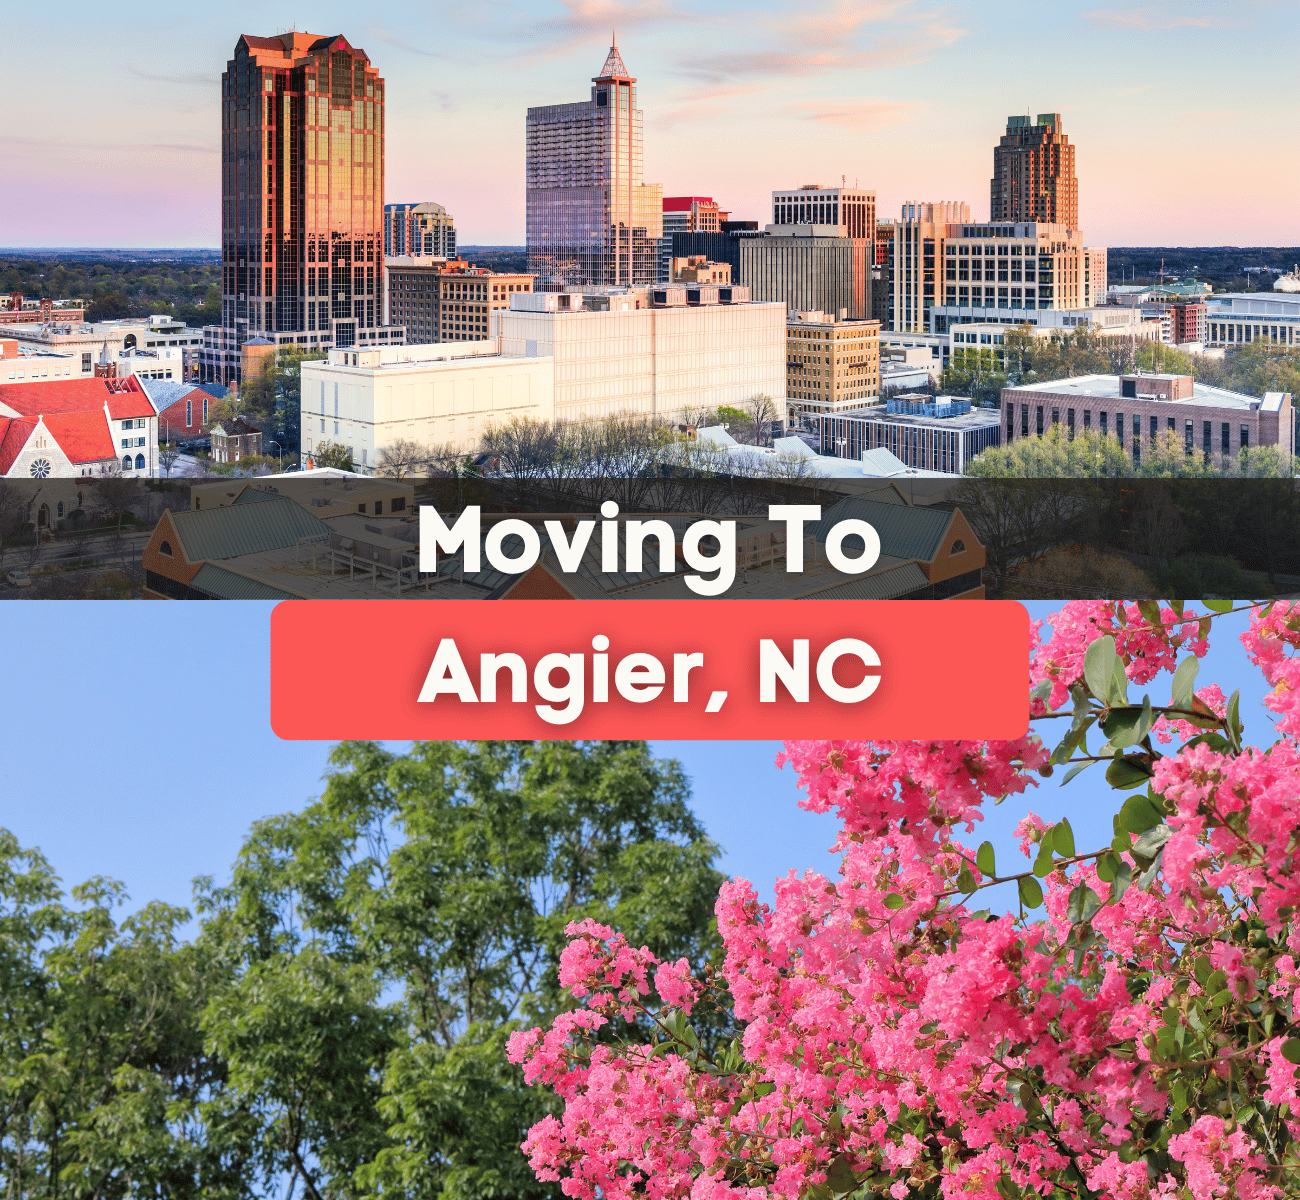 moving to Angier, NC - crepe myrtle tree and city of Raleigh